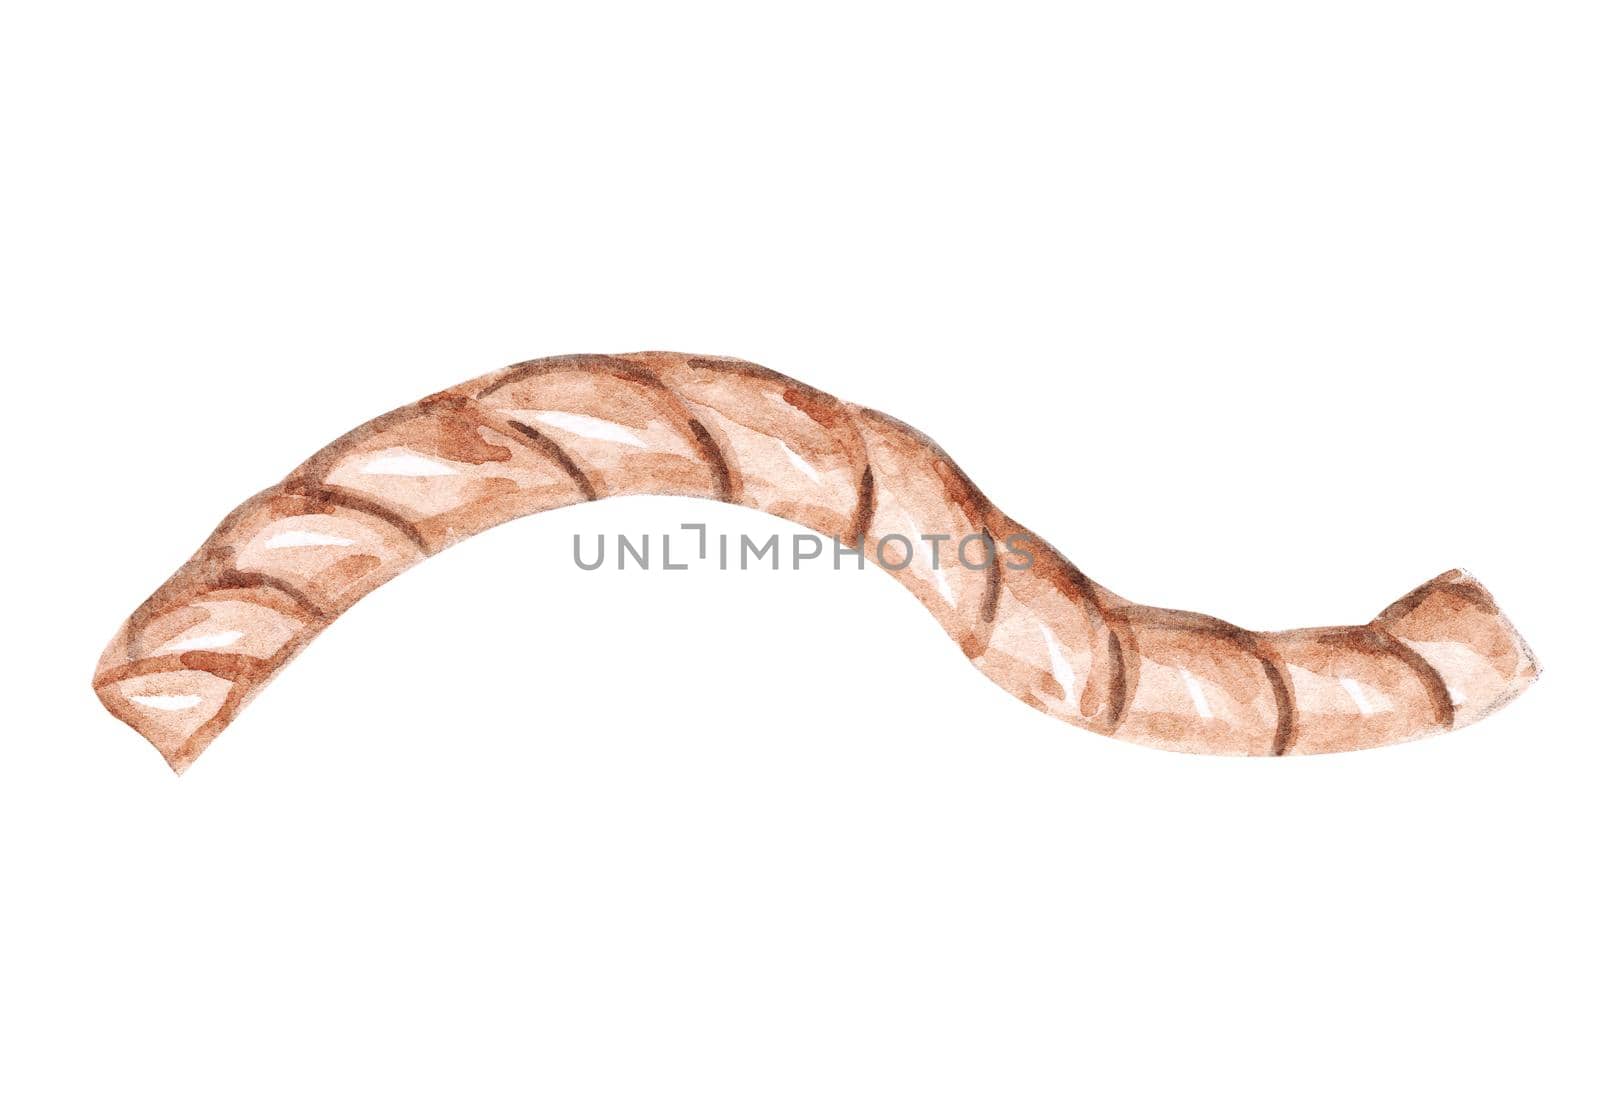 Watercolor brown rope isolated on white background by dreamloud